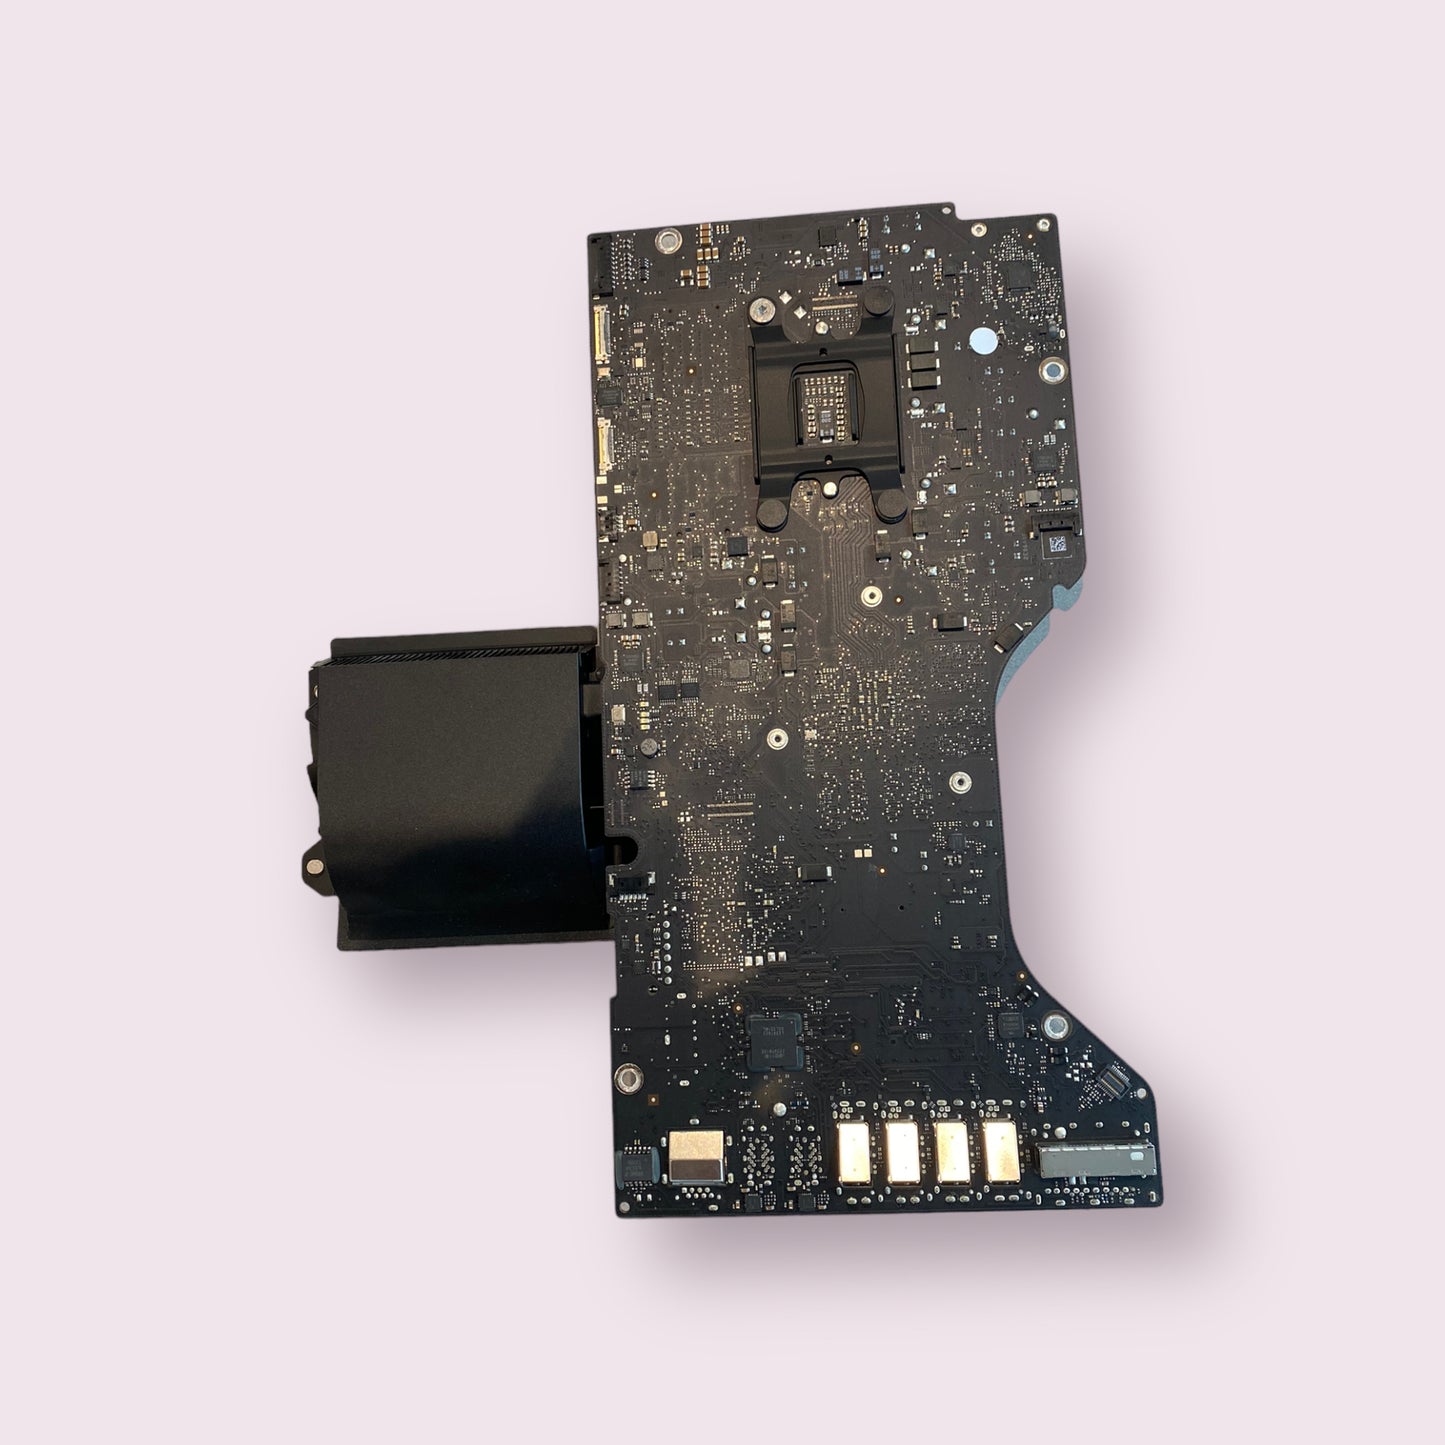 Apple iMac 21.5" Late 2012 A1418 Motherboard 820-3302-A Intel Core i5 2.7GHz - Genuine Pull Part